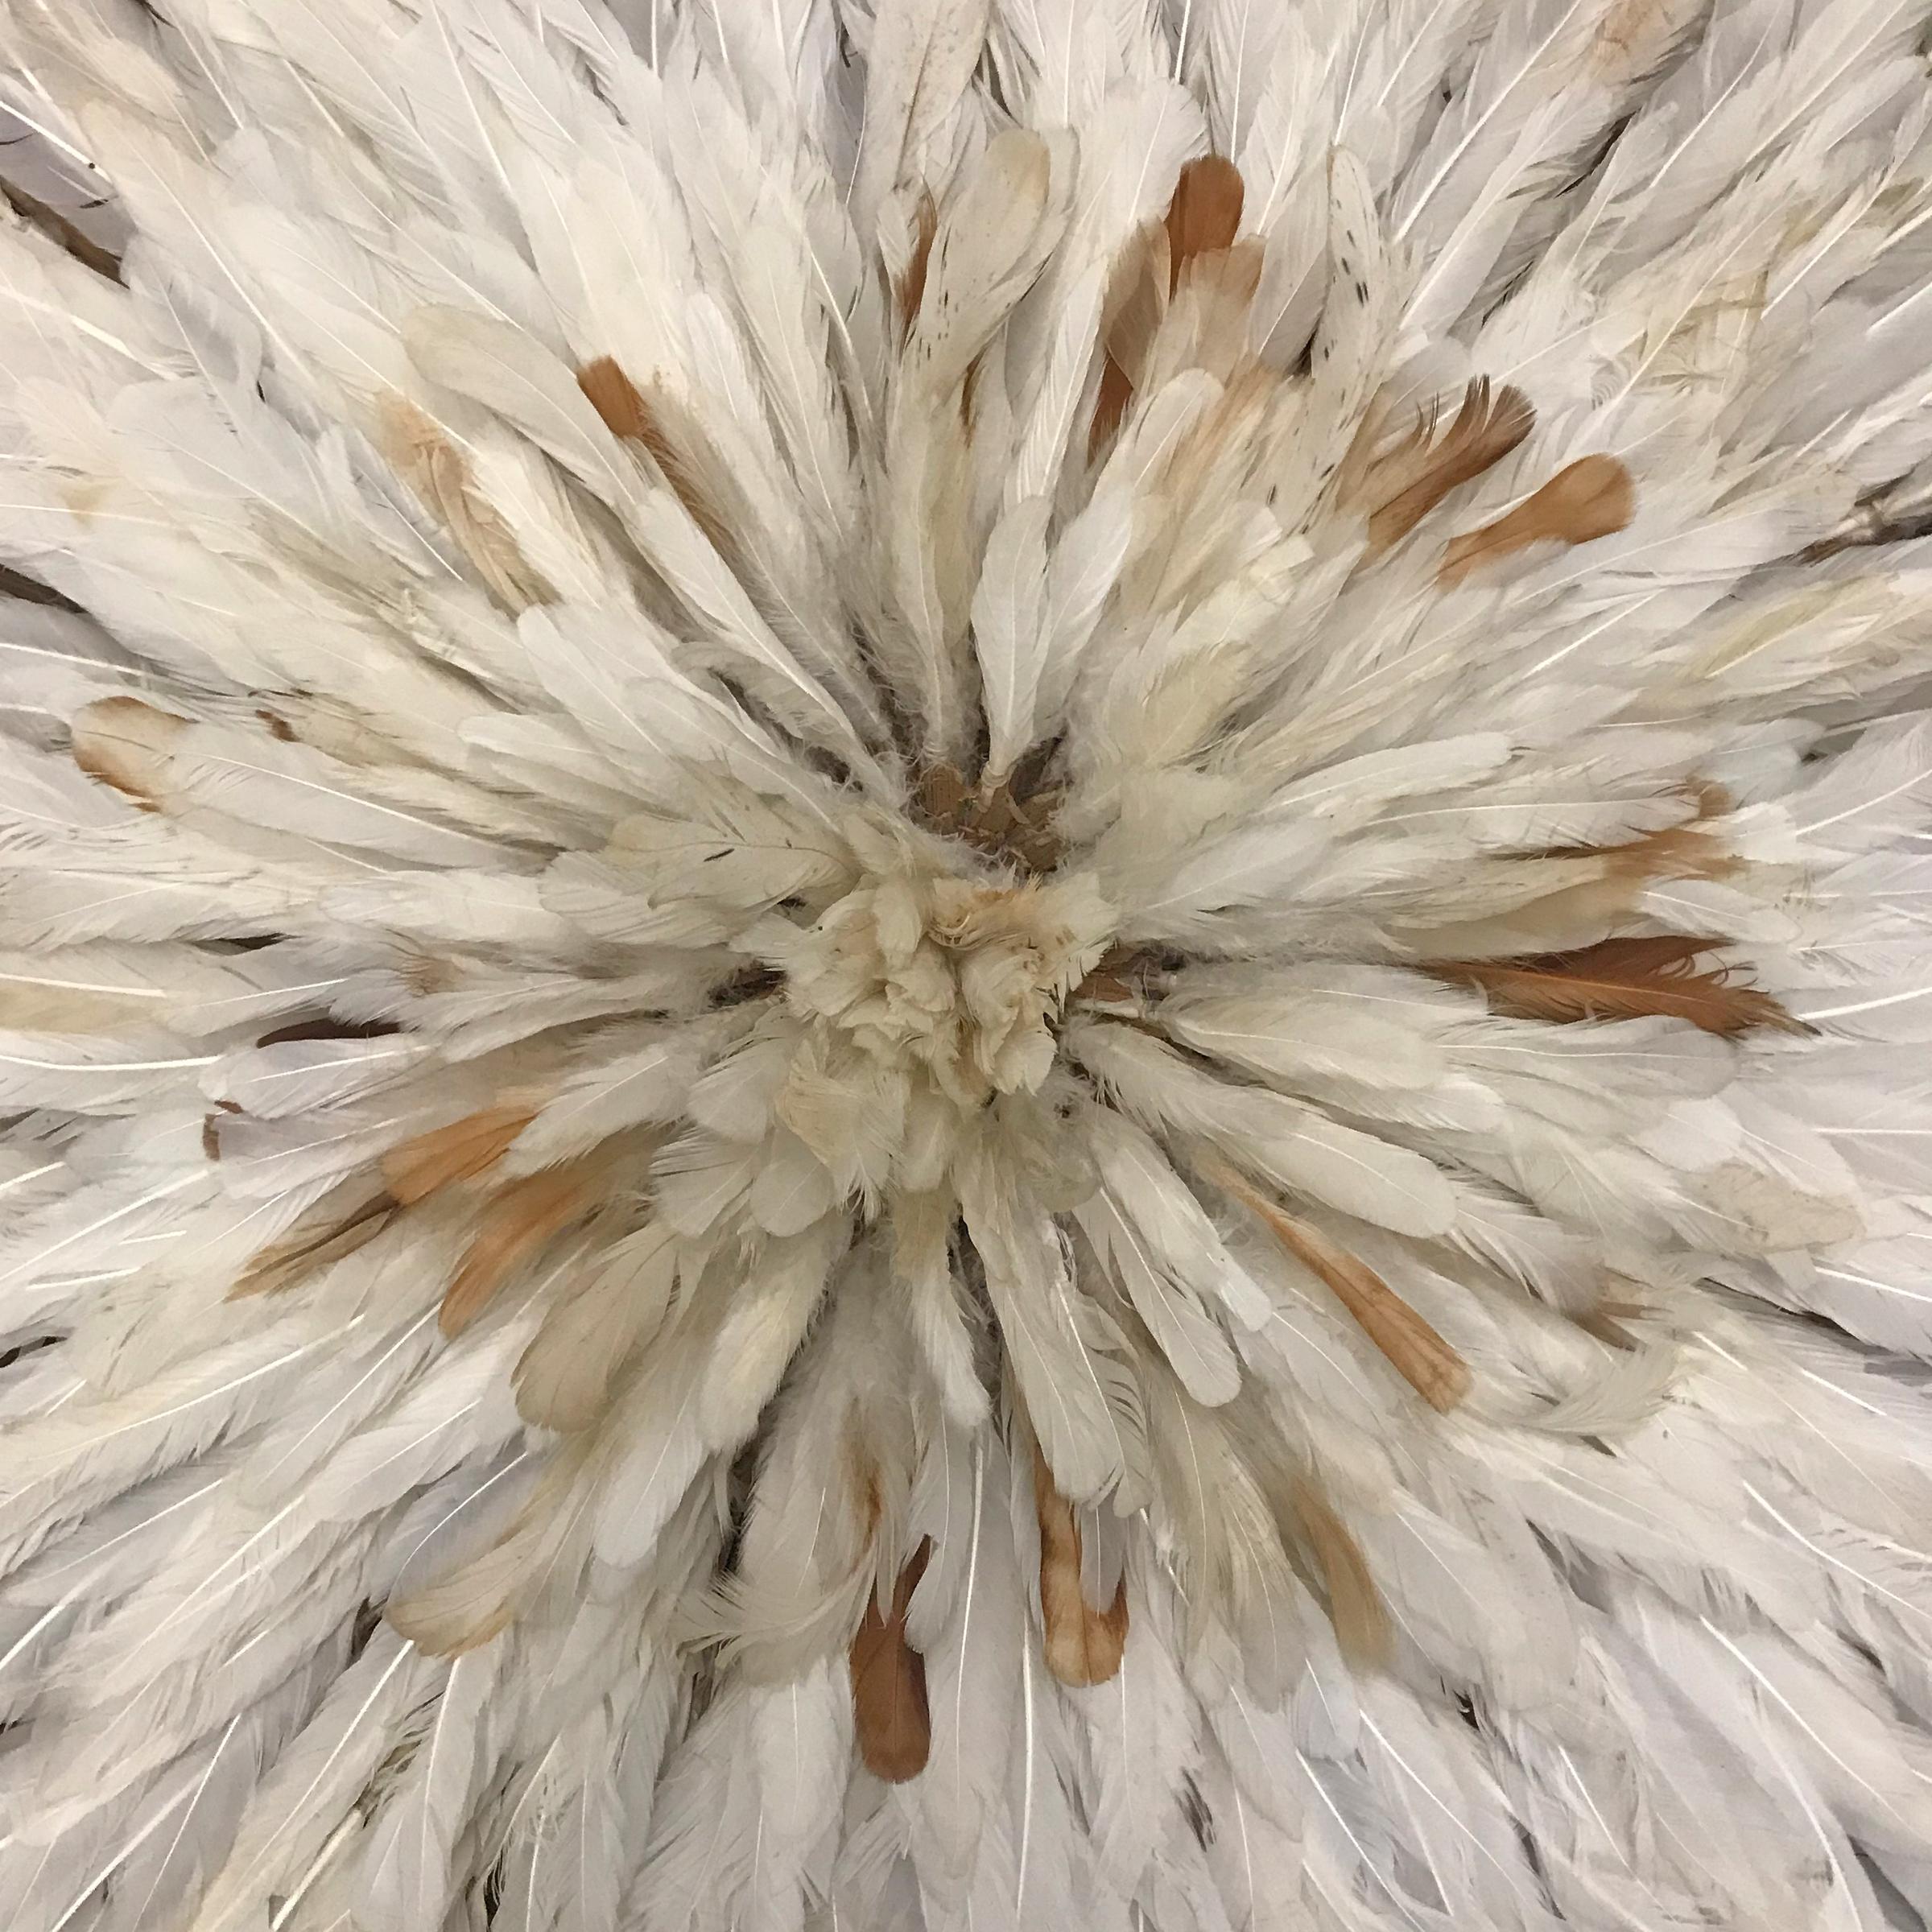 A fantastic late 20th century Bamileke Juju headdress created by weaving a foundation of plant fibers, and filled with hundreds of white and brown chicken feathers. The headdress folds up for storage. Juju headdresses are handmade by the Bamileke